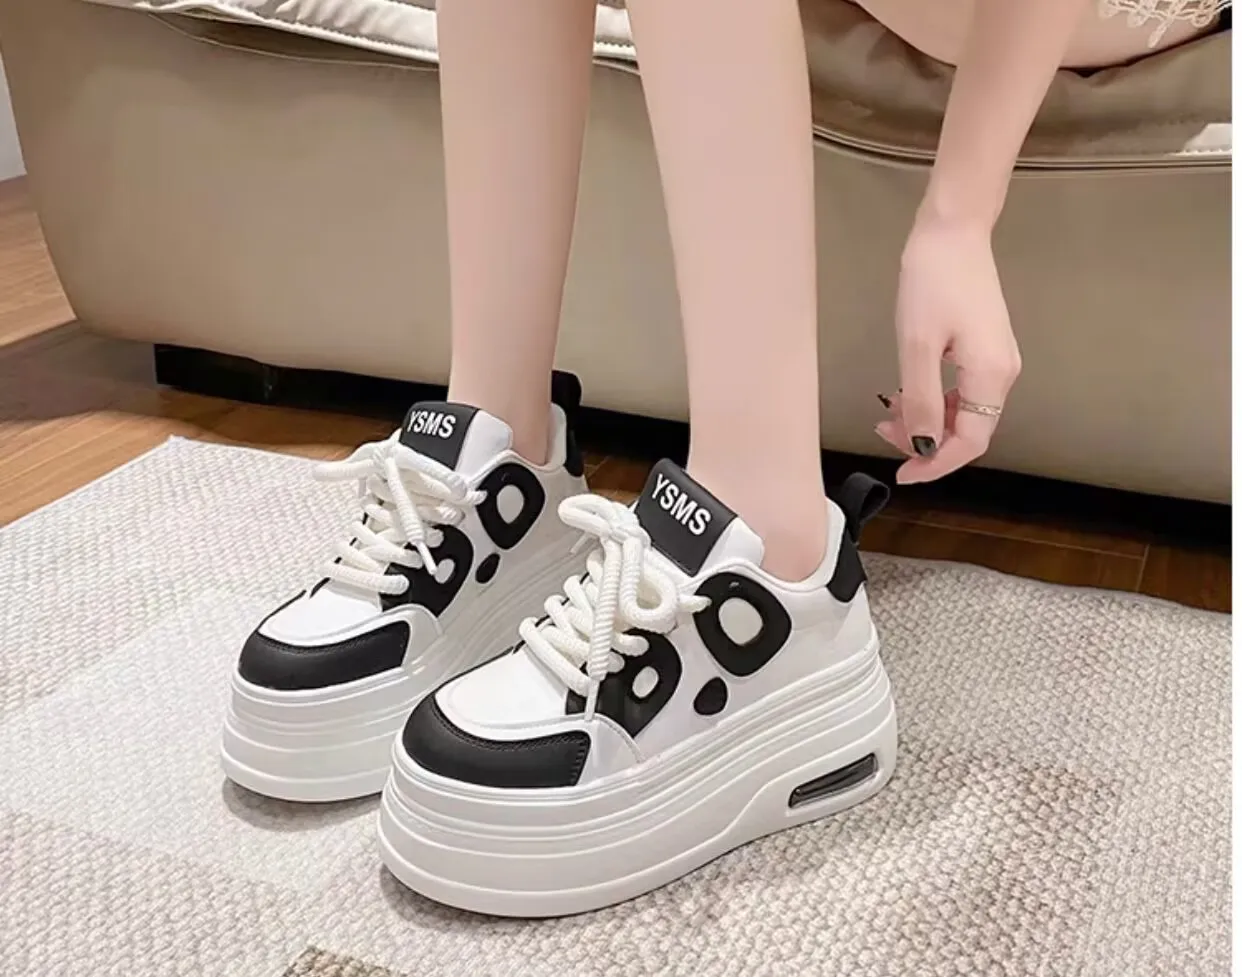 Chic Platform Sneakers for Women - Trendy, Comfortable and Stylish - true deals club